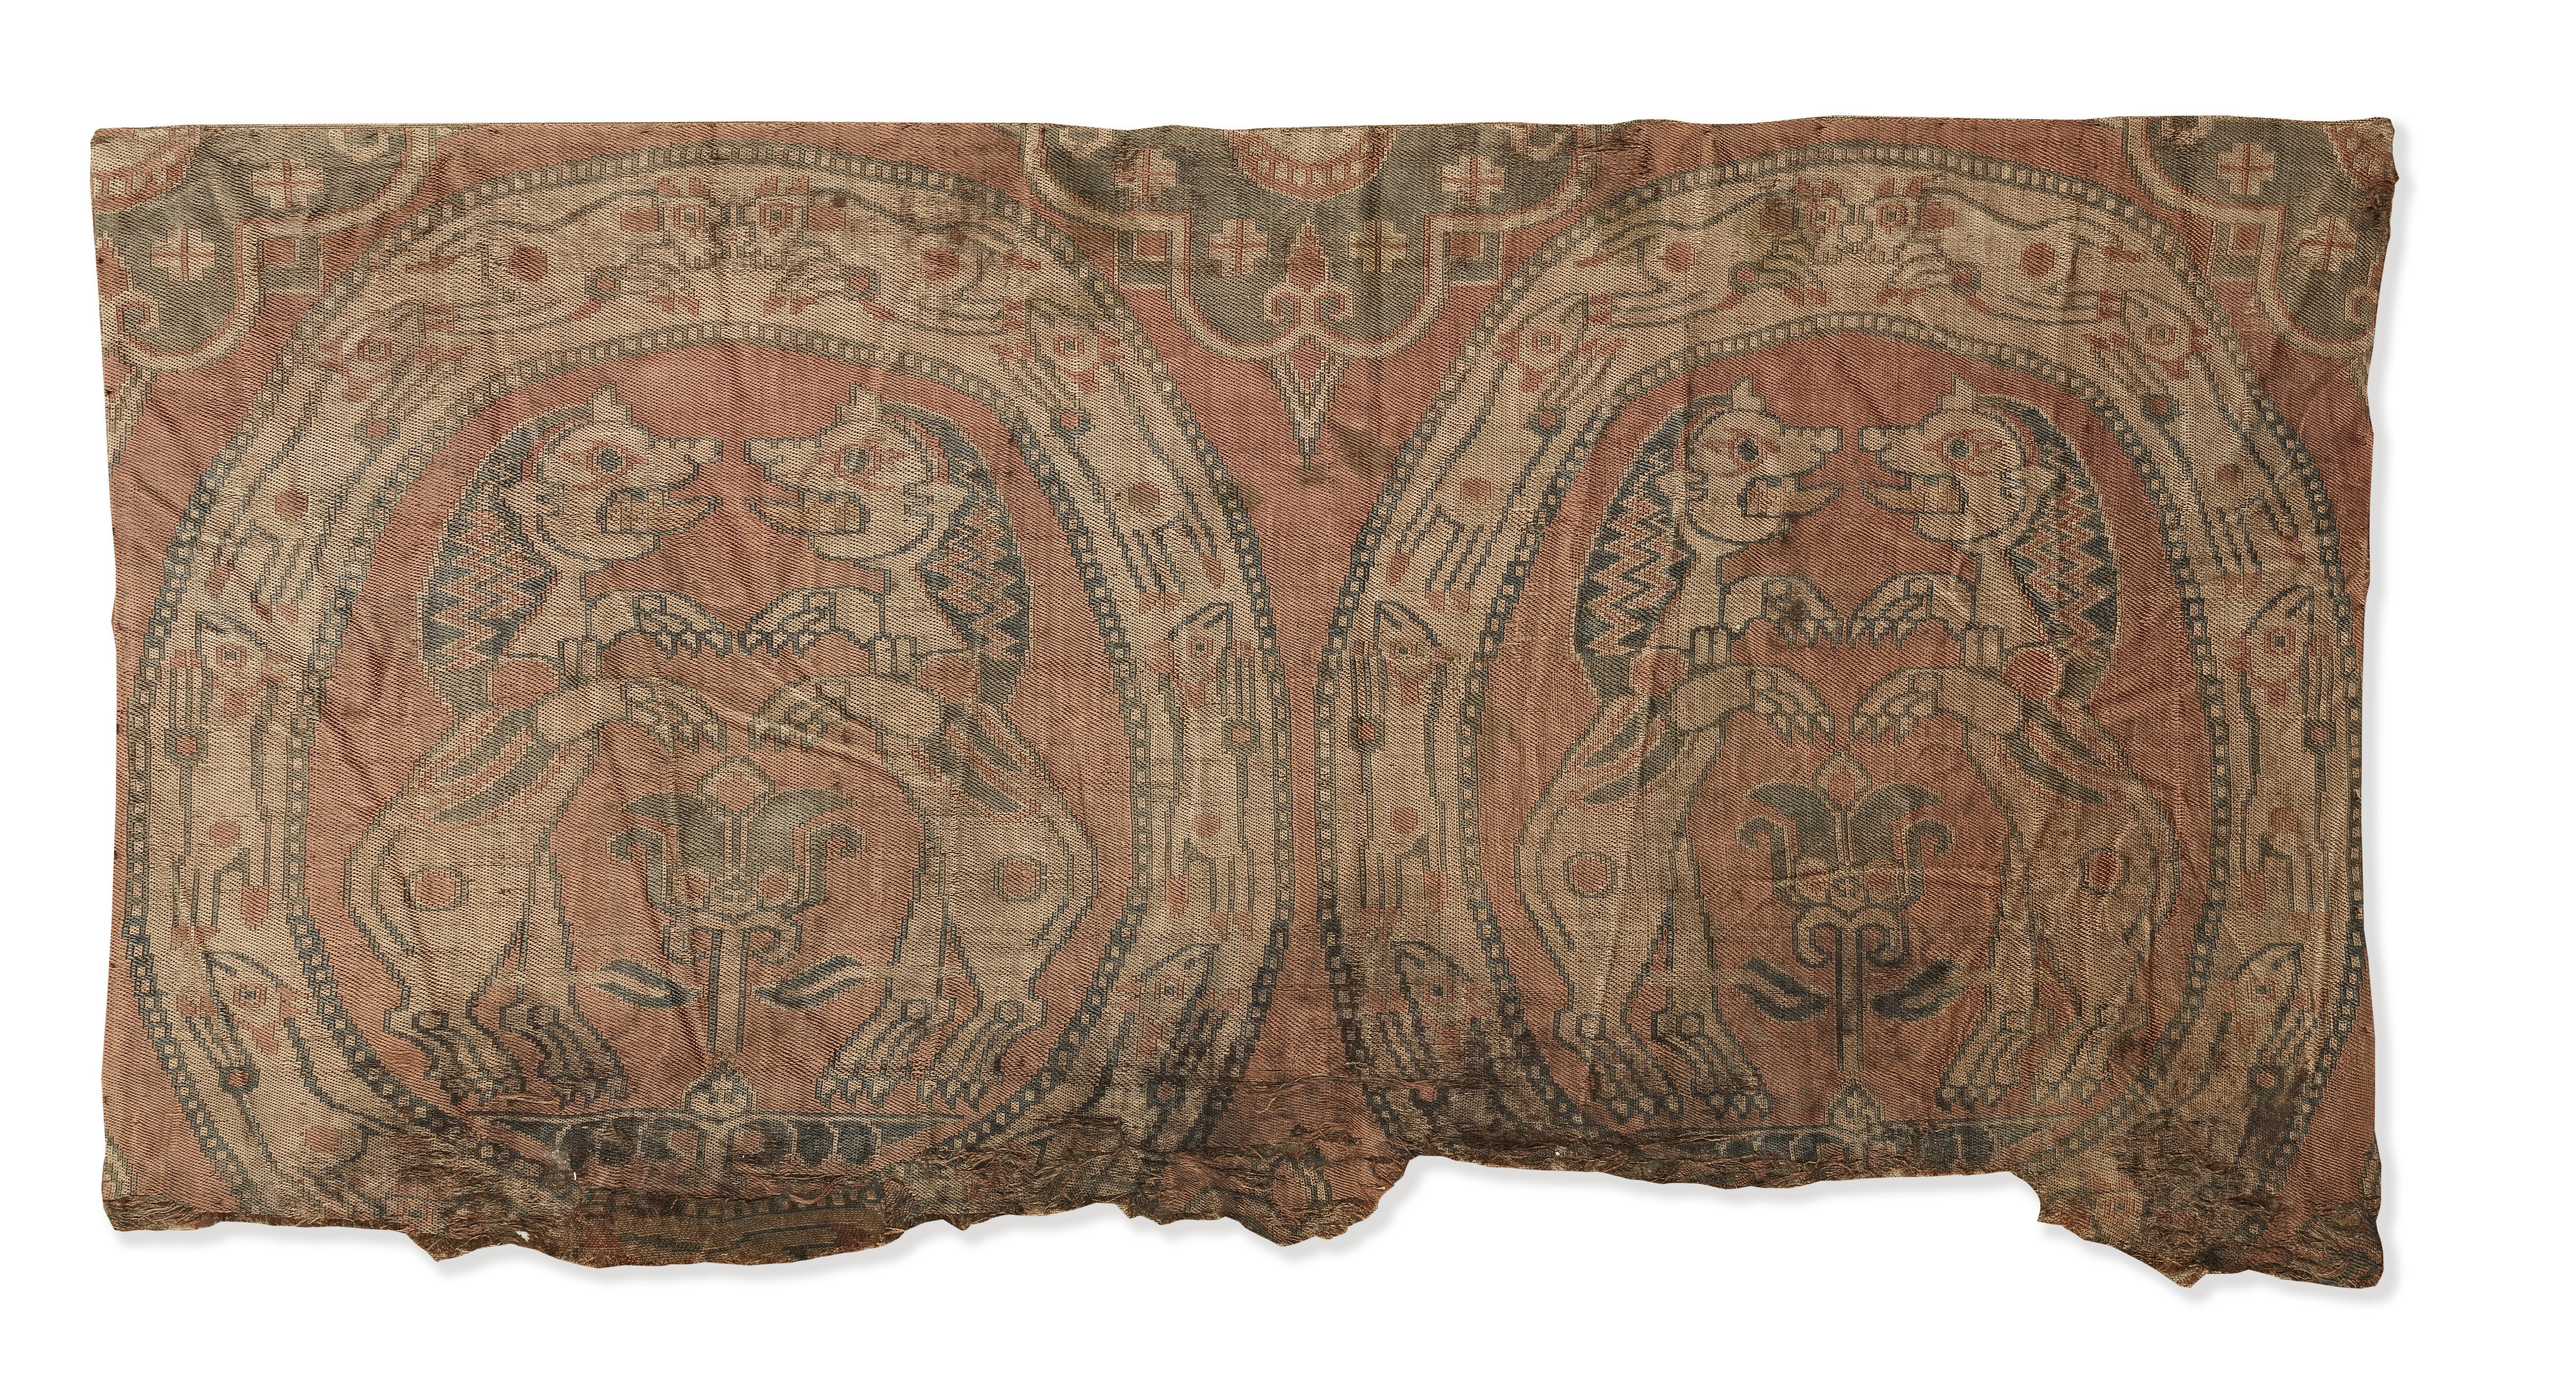 A Sogdian silk samite fragment with confronting lions Central Asia, 7th-9th Century